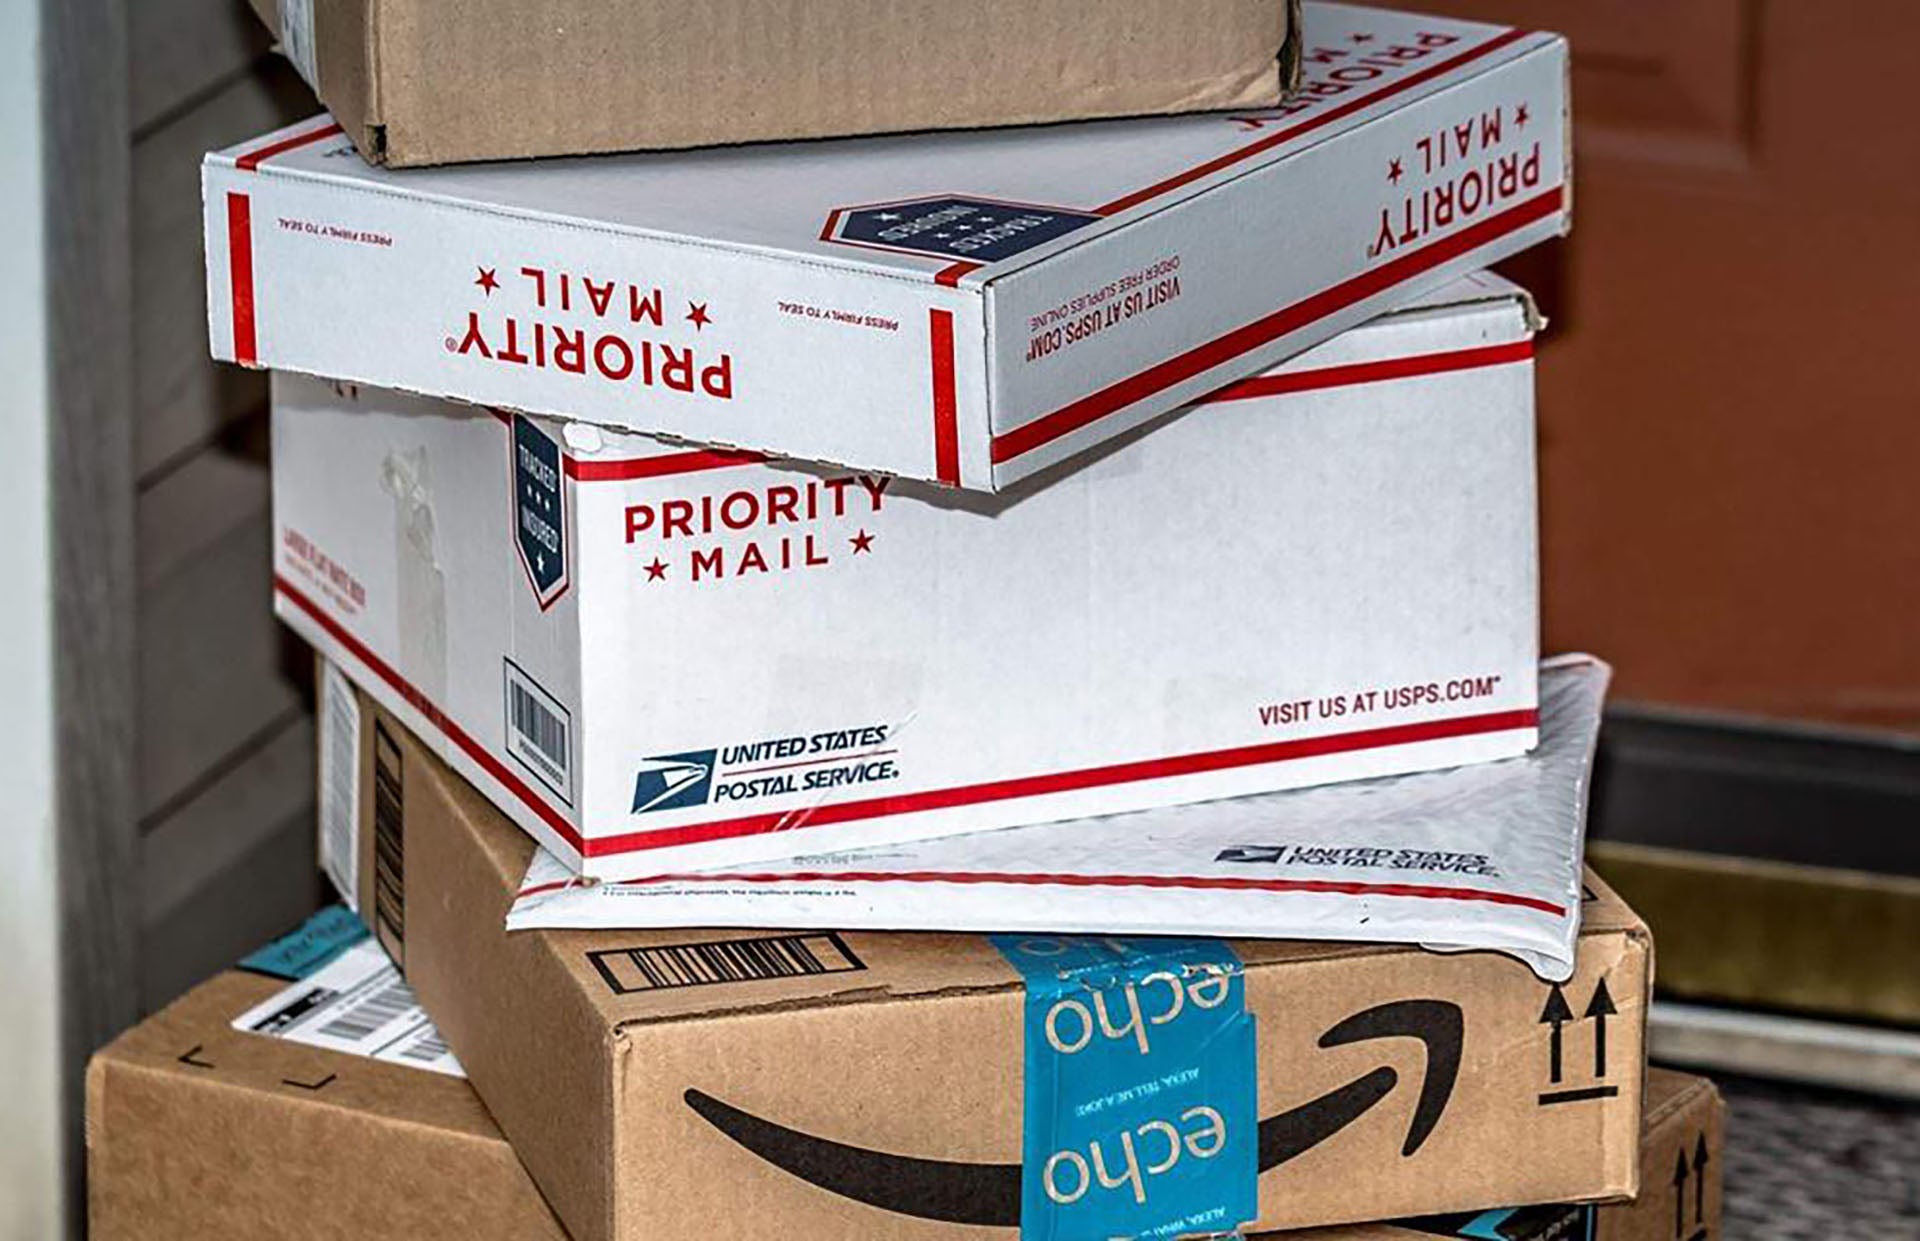 stack of amazon packages